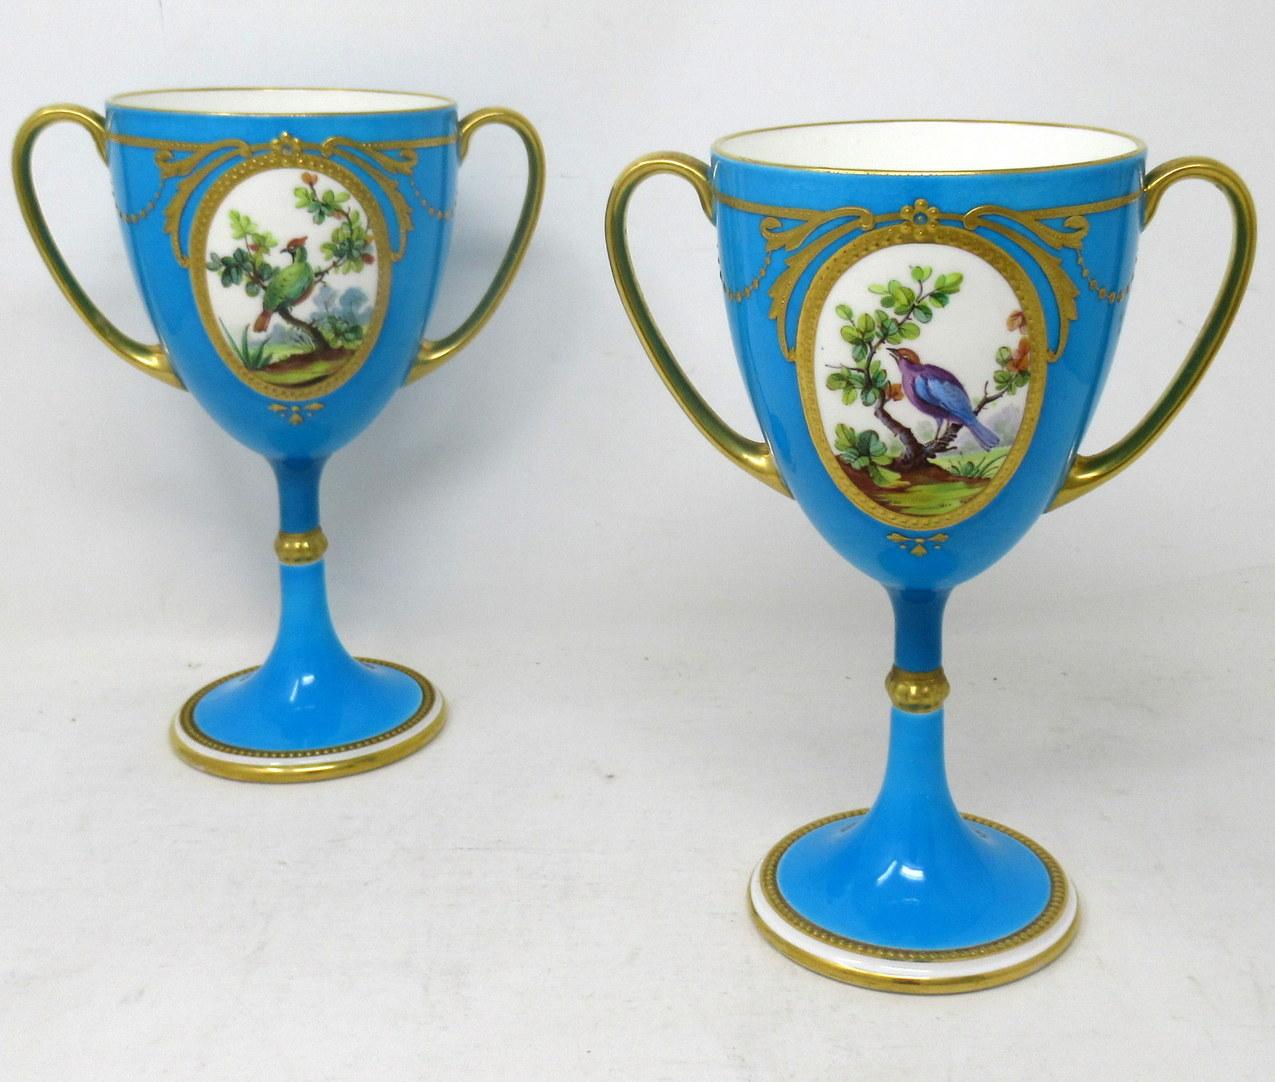 Stunning Example of a Pair of English Minton Porcelain long stem twin handle cups or vases of outstanding quality, firmly attributed to Artist James Edwin Dean (1863-1935). 

Each central oval reserve exquisitely hand painted with an exotic Bird